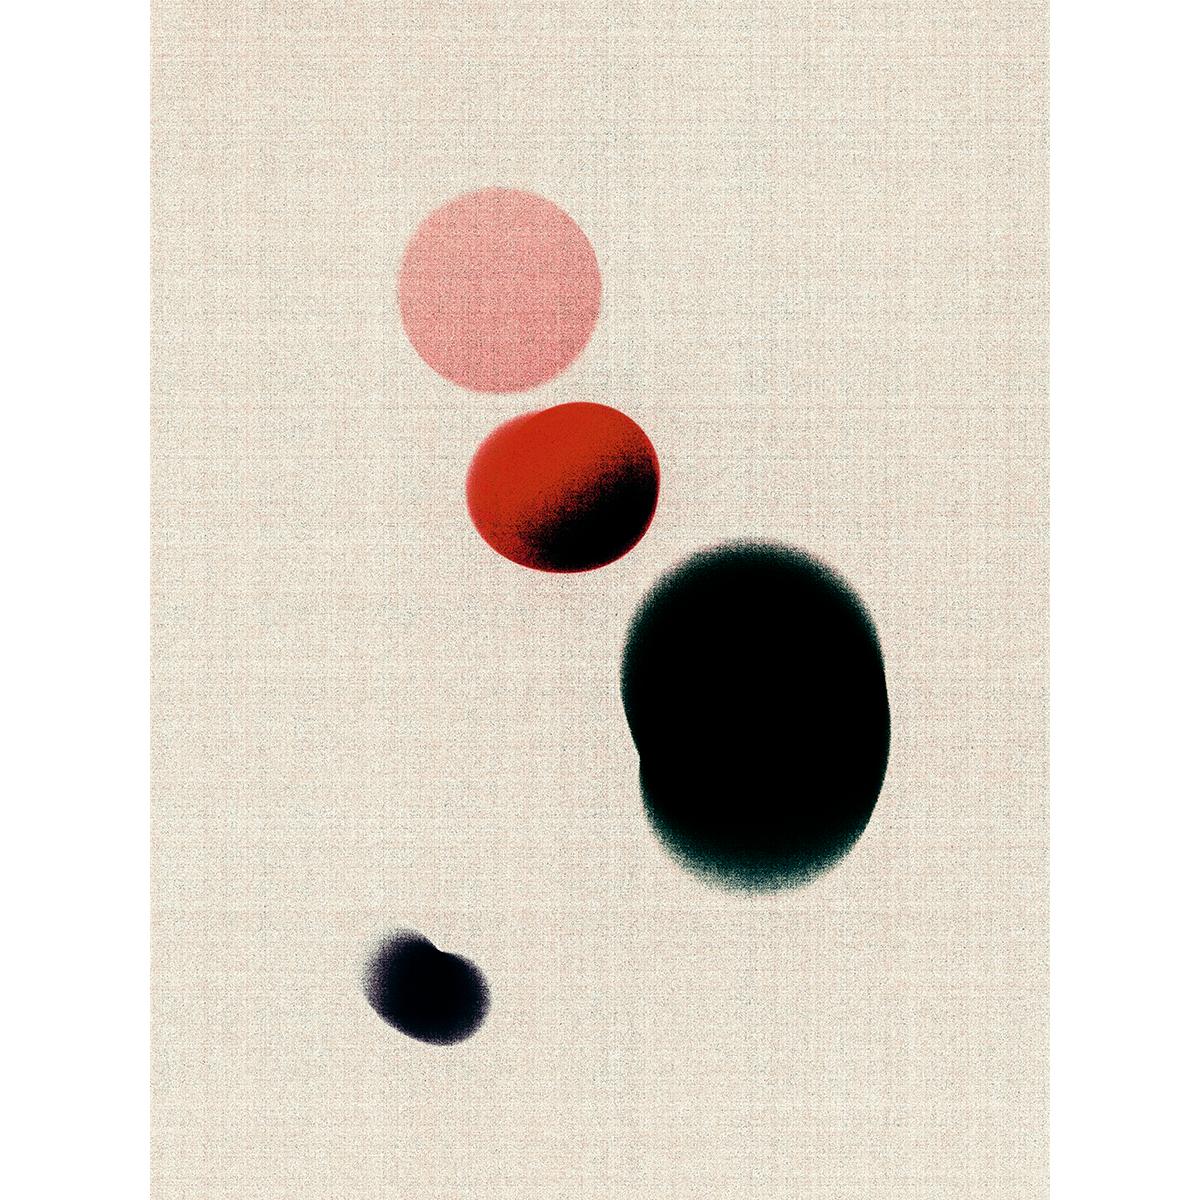 Luuk de Haan Color Photograph - Red, white, black, abstraction, photography,  edition of one, Ukiyo #3